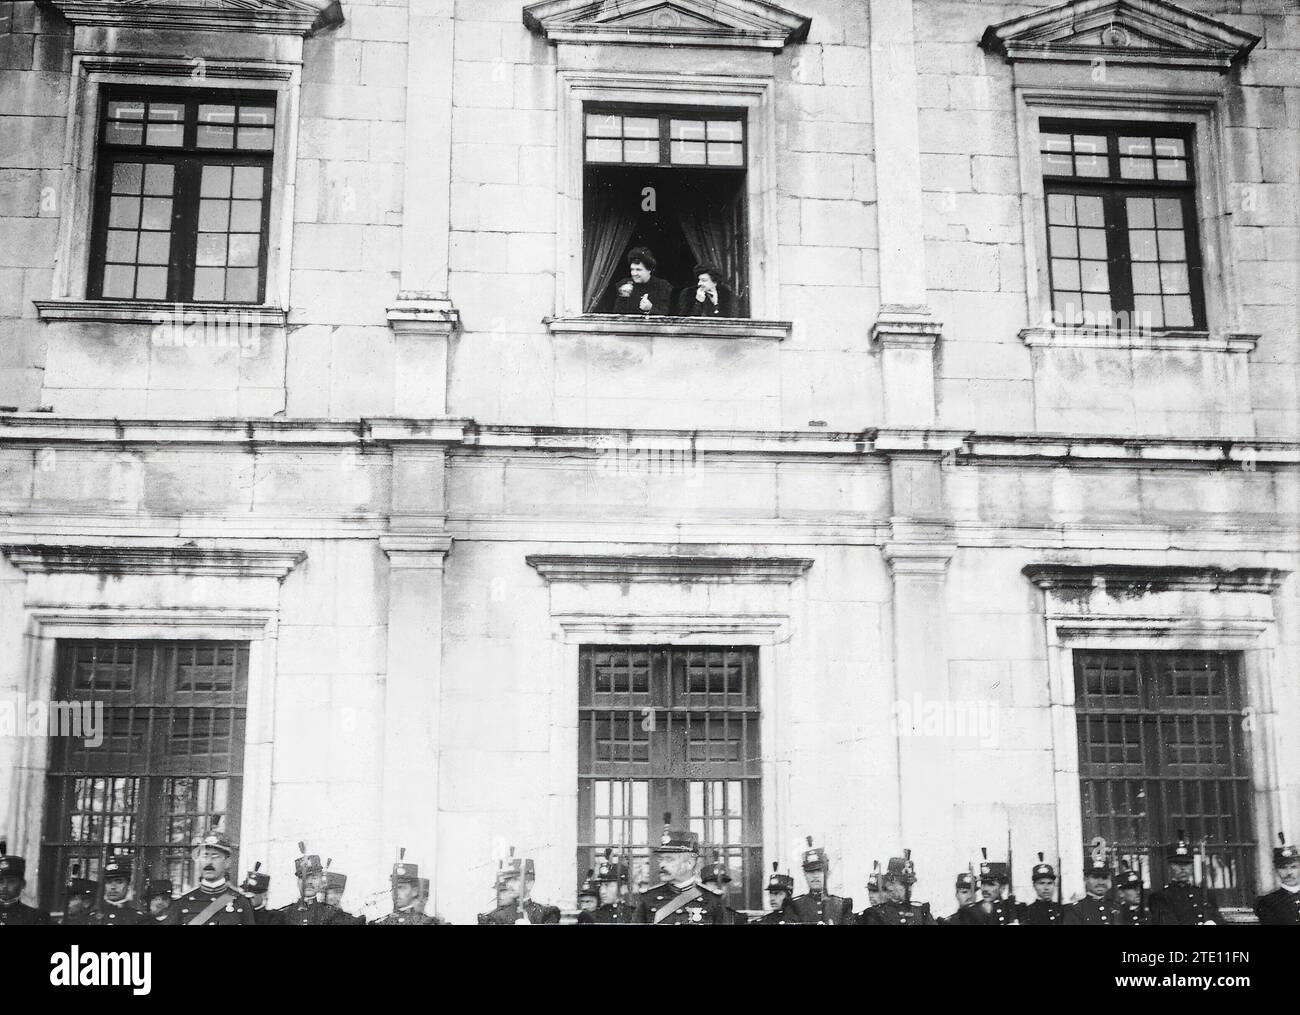 12/31/1908. The Queen Mother, Doña Amelia de Orleans, looking out from a balcony in the Portuguese town of Villaviciosa, during the visit of King D. Manuel II of Portugal. Credit: Album / Archivo ABC / Joshua Benoliel Stock Photo